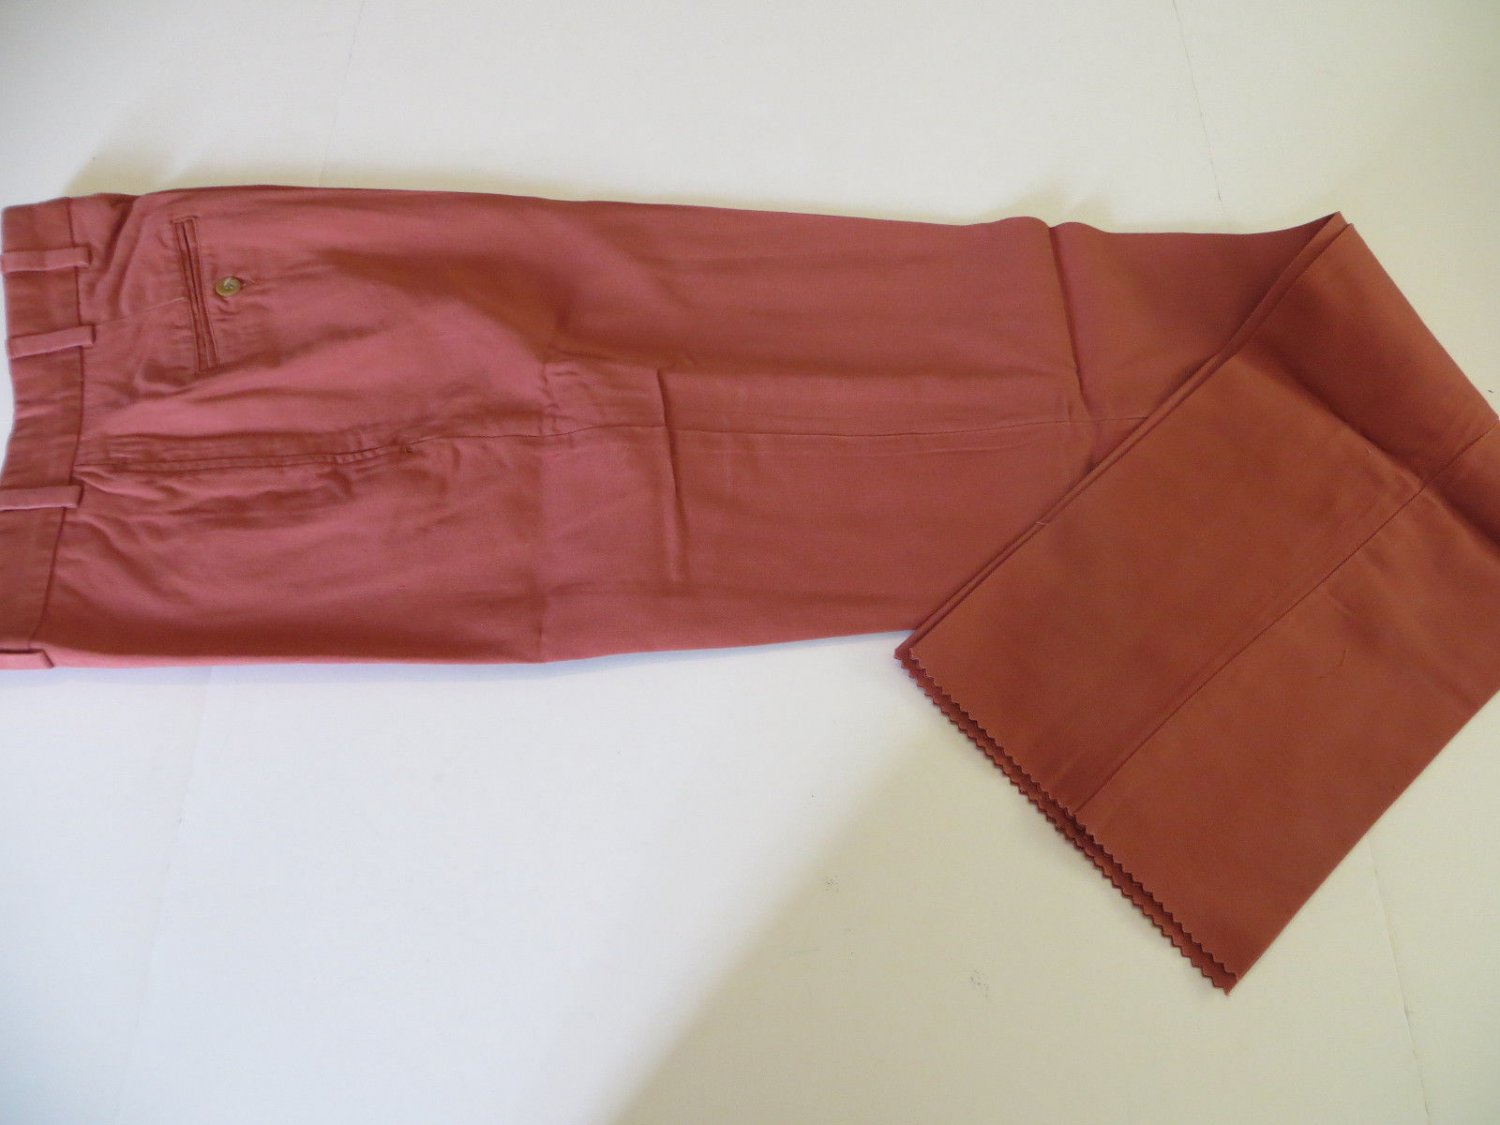 Bills Khakis plain front m1 relaxed fit weathered red size 30 made in